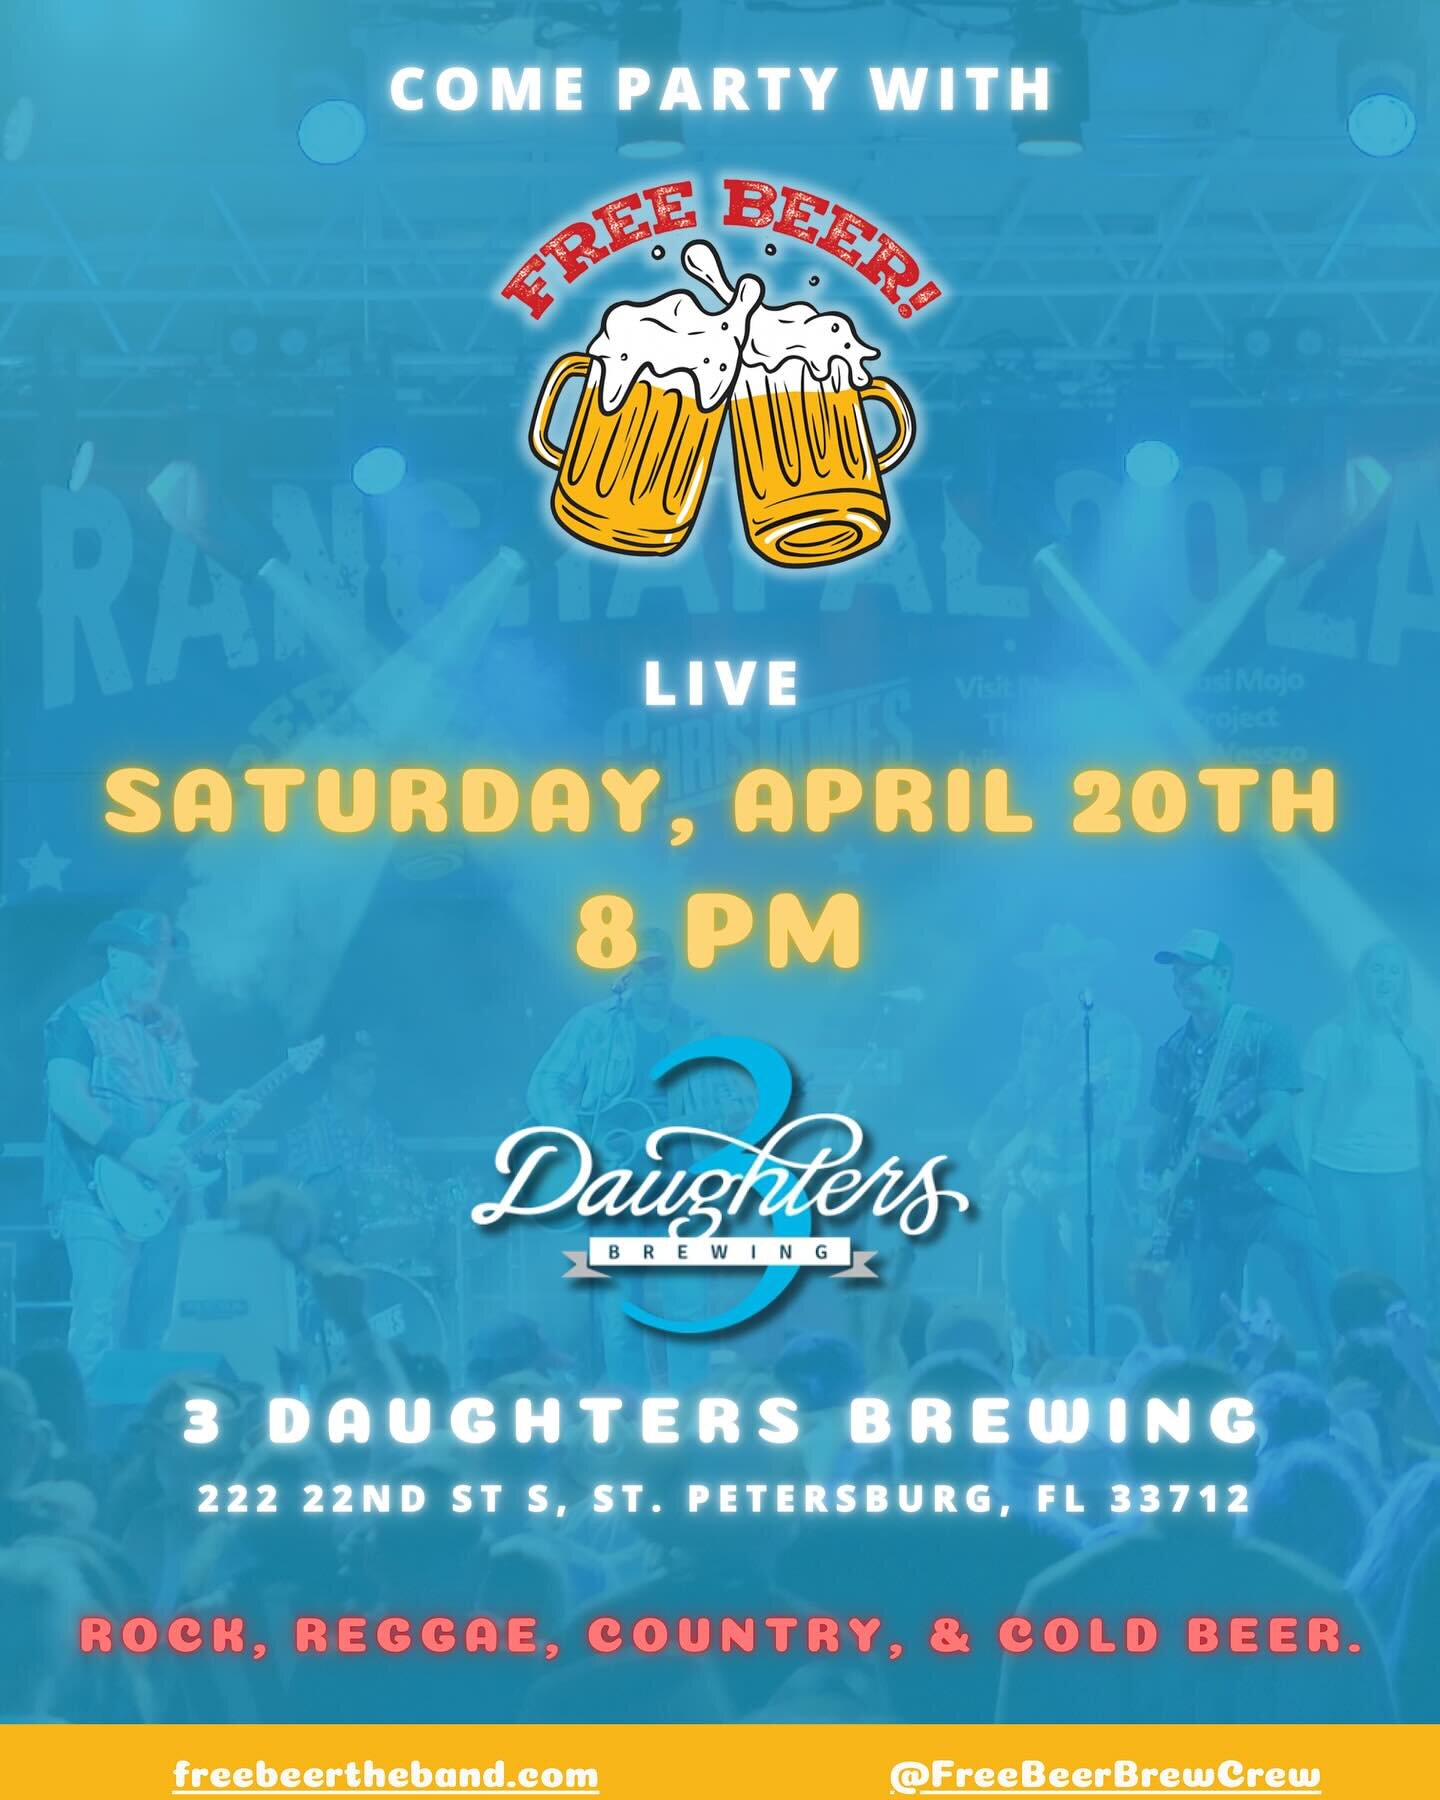 It&rsquo;s finally April, and you&rsquo;d be a FOOL to miss an evening like this!

🍺Craft Beer
🍔Great Bites
🎵Live Music

Join us on 4/20 at 3 Daughters Brewing, one of Florida&rsquo;s largest independent family-owned breweries. Show starts at 8pm,